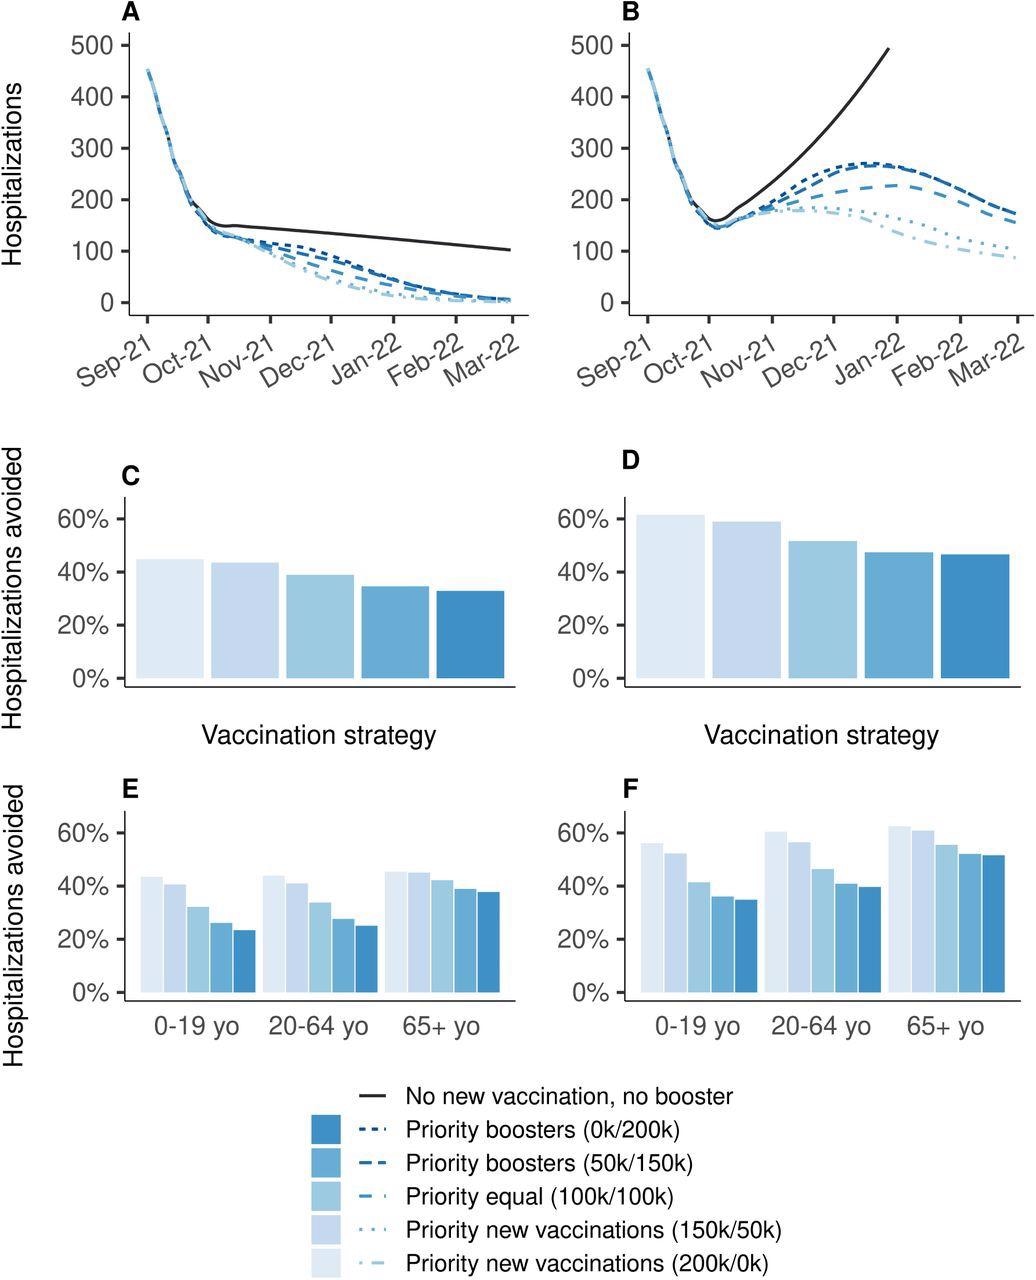 Effectiveness in hospitalizations of vaccination strategies that vary in the allocation of 200,000 daily doses between primary vaccination and booster injections, during the period between September 1, 2021 and March 1, 2022, in comparison with a baseline scenario in which all vaccination stops on September 1, 2021. (A, C, E) Vaccine efficacy decreased only for people 65 years of age or older.  (B, D, F) Vaccine efficacy decreased for all age groups.  (A, B) New daily hospitalizations, (C, D) proportion of hospitalizations avoided, (E, F) proportion of hospitalizations avoided by age group.  A prioritization strategy of (150,000 / 50,000) means 150,000 daily doses for primary vaccination and 50,000 daily booster doses until coverage of 90% of a target population is achieved, and then all 200,000 daily doses are they assign to the other target population.